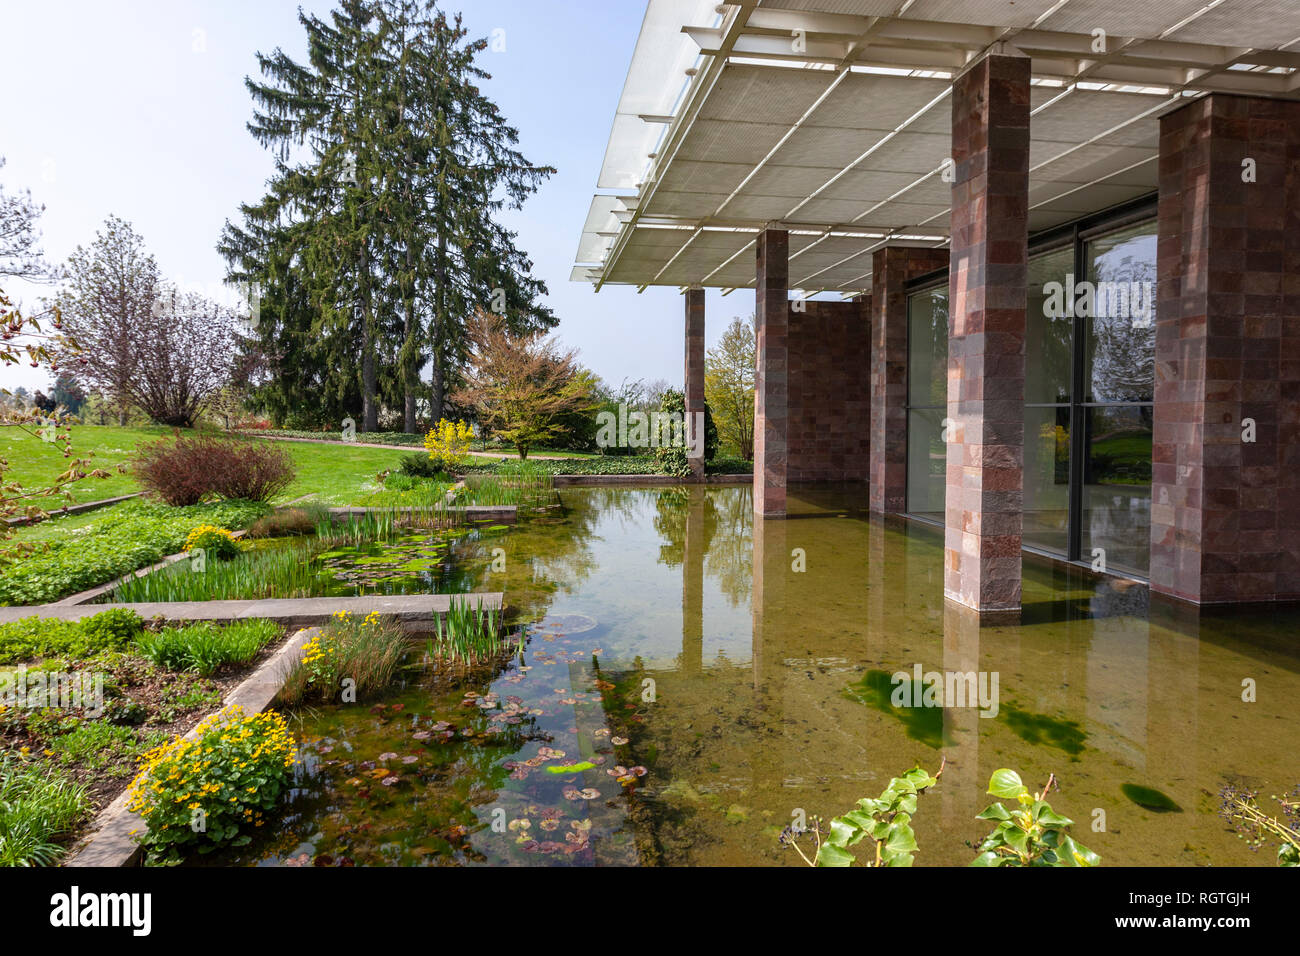 The beyeler foundation hi-res stock photography and images - Alamy